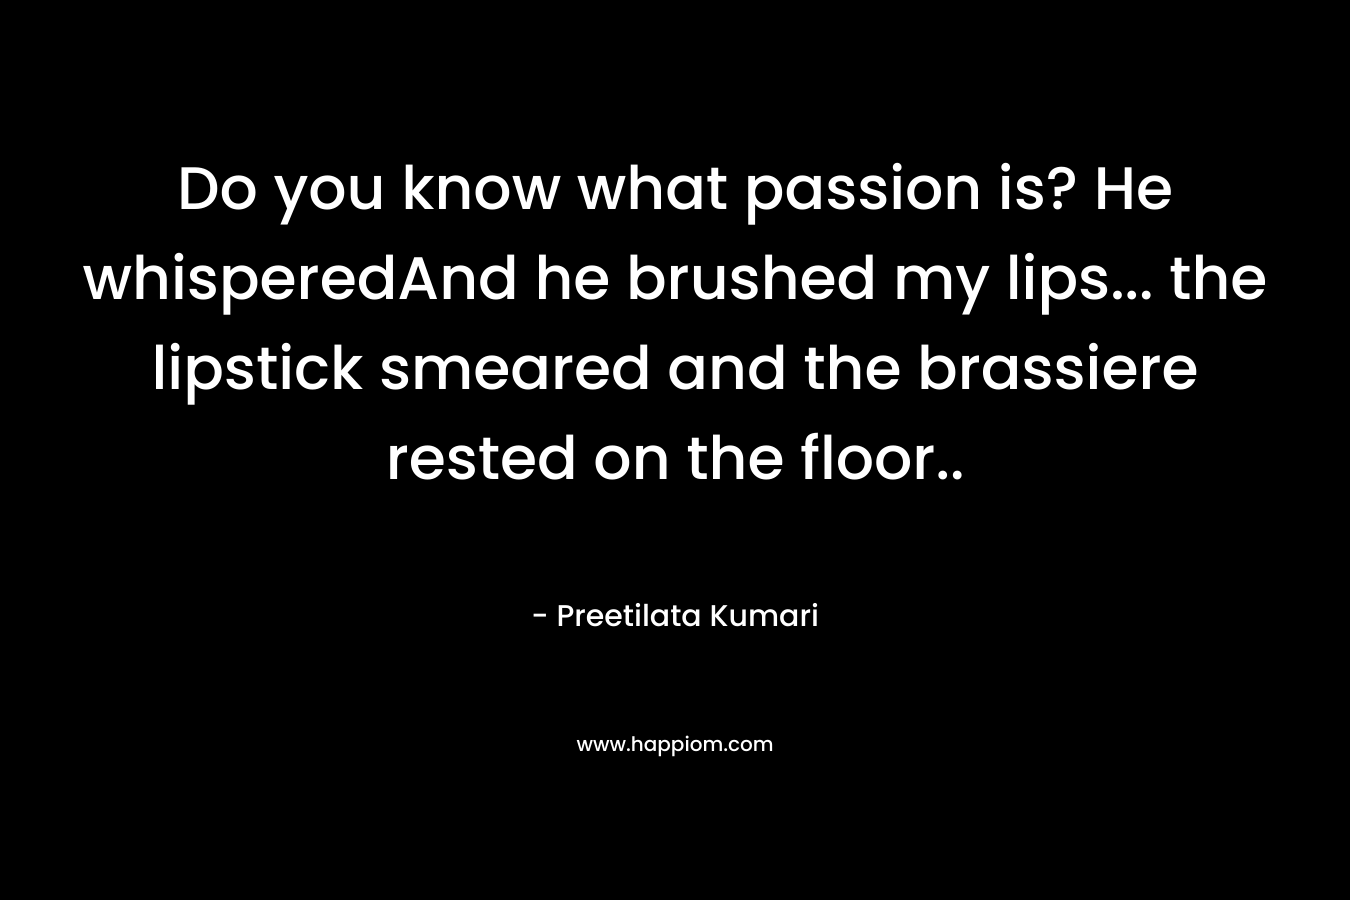 Do you know what passion is? He whisperedAnd he brushed my lips… the lipstick smeared and the brassiere rested on the floor.. – Preetilata Kumari